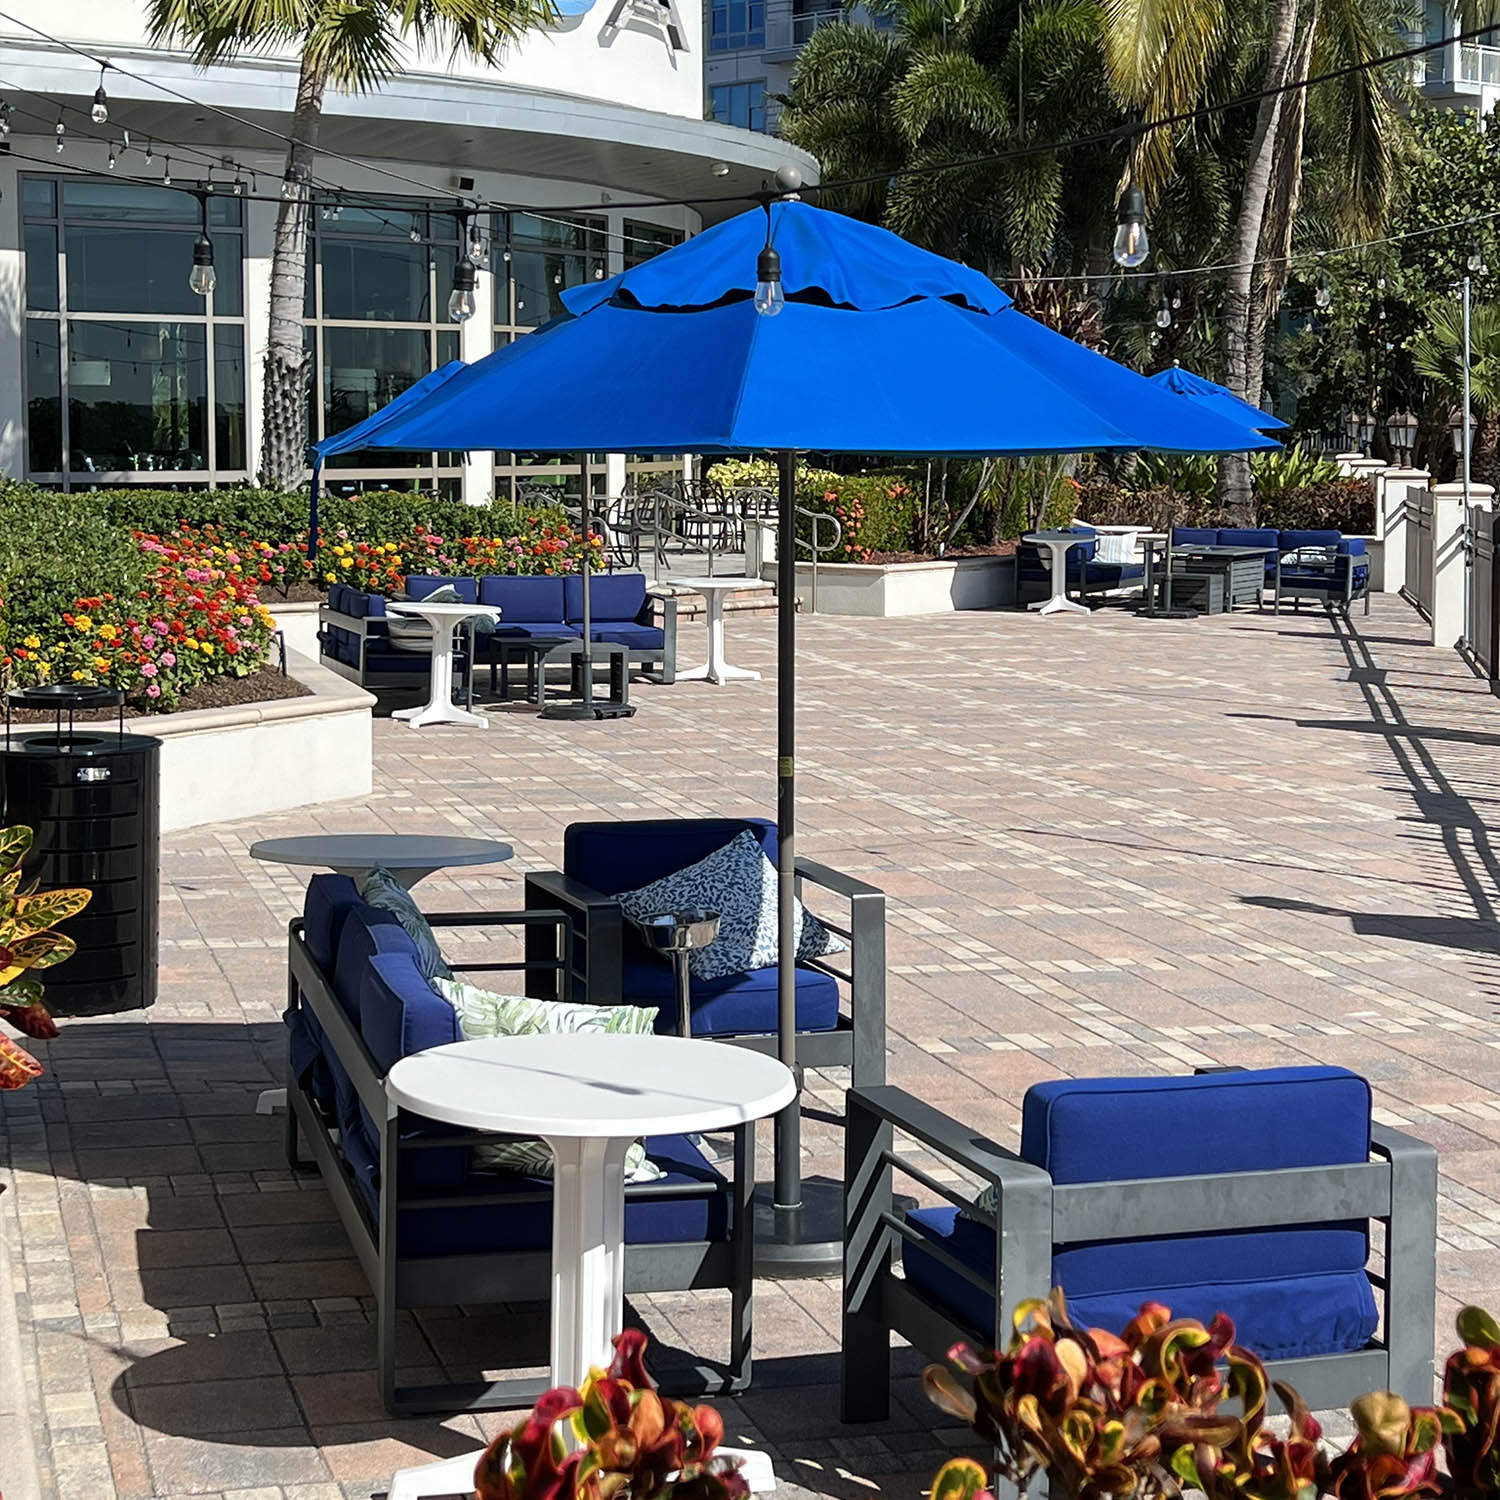 Windmaster Umbrellas compliment the color scheme at Westin Tampa Bay Resort